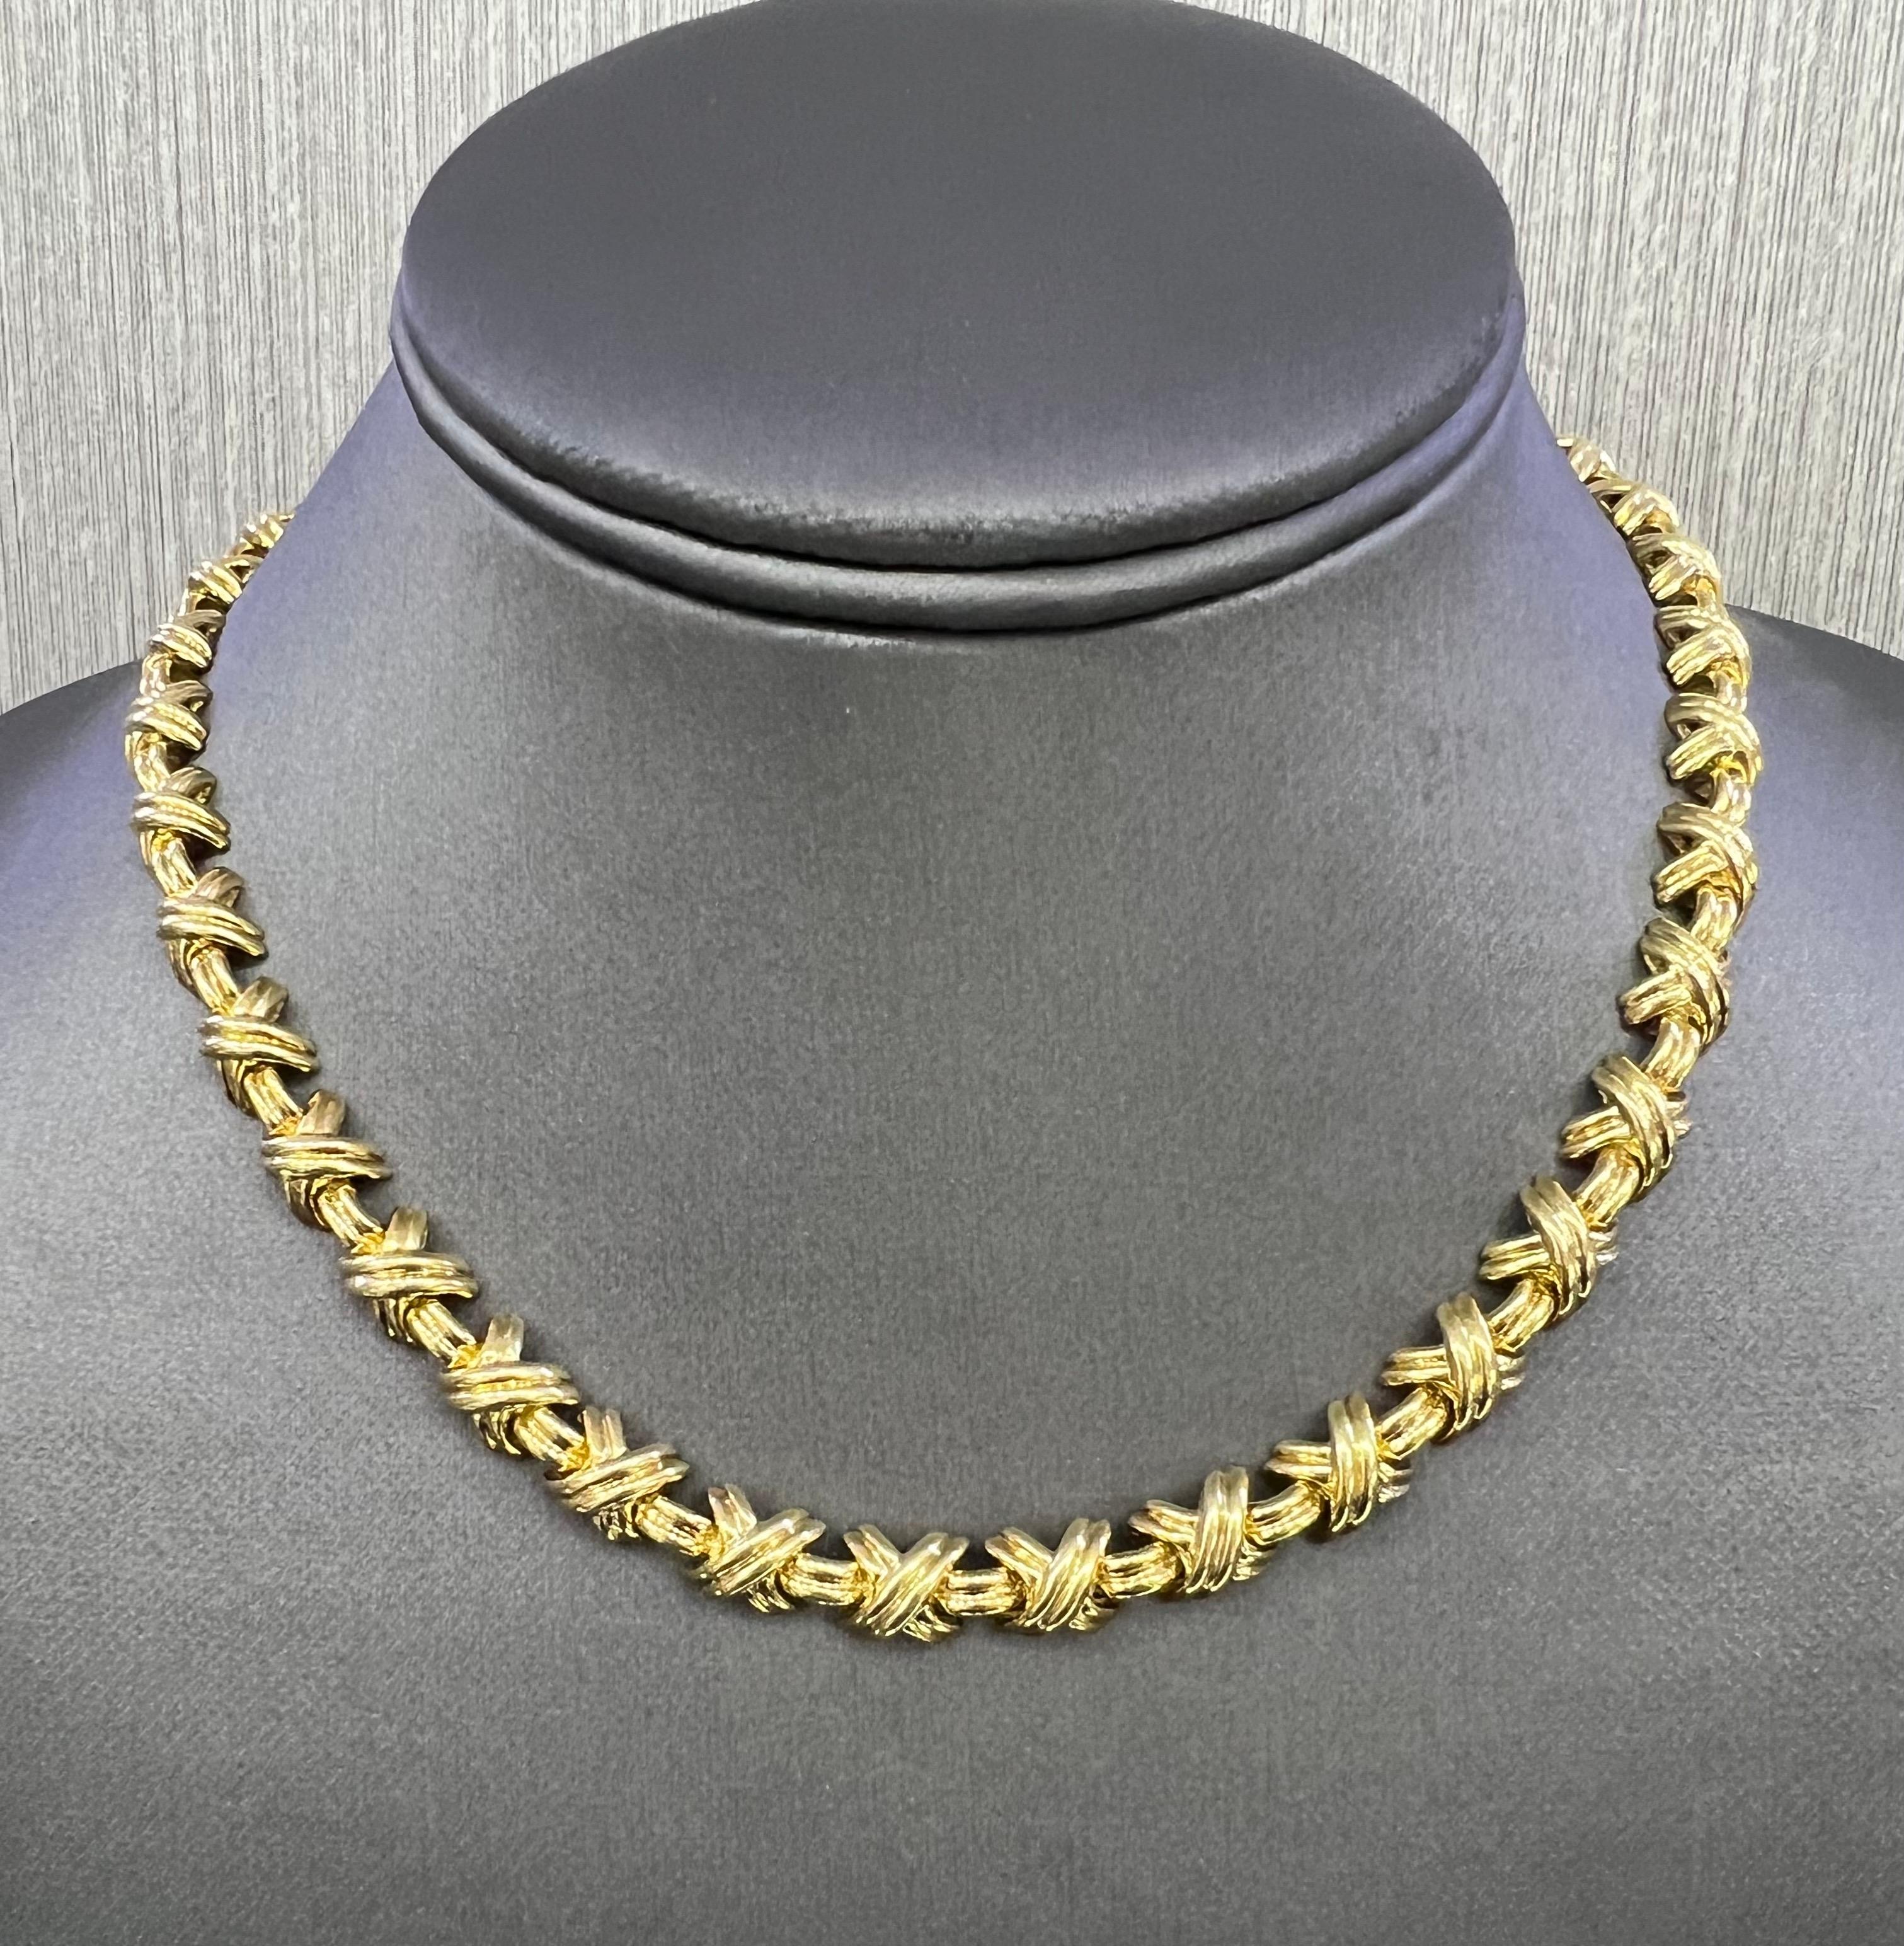 Beautiful necklace by famed designer Tiffany & Co. the necklace is crafted in solid 18k yellow gold and is from the X collection. 
   The necklace shows a 7.5 mm width and weighs 64.4 grams. The necklace measures 16